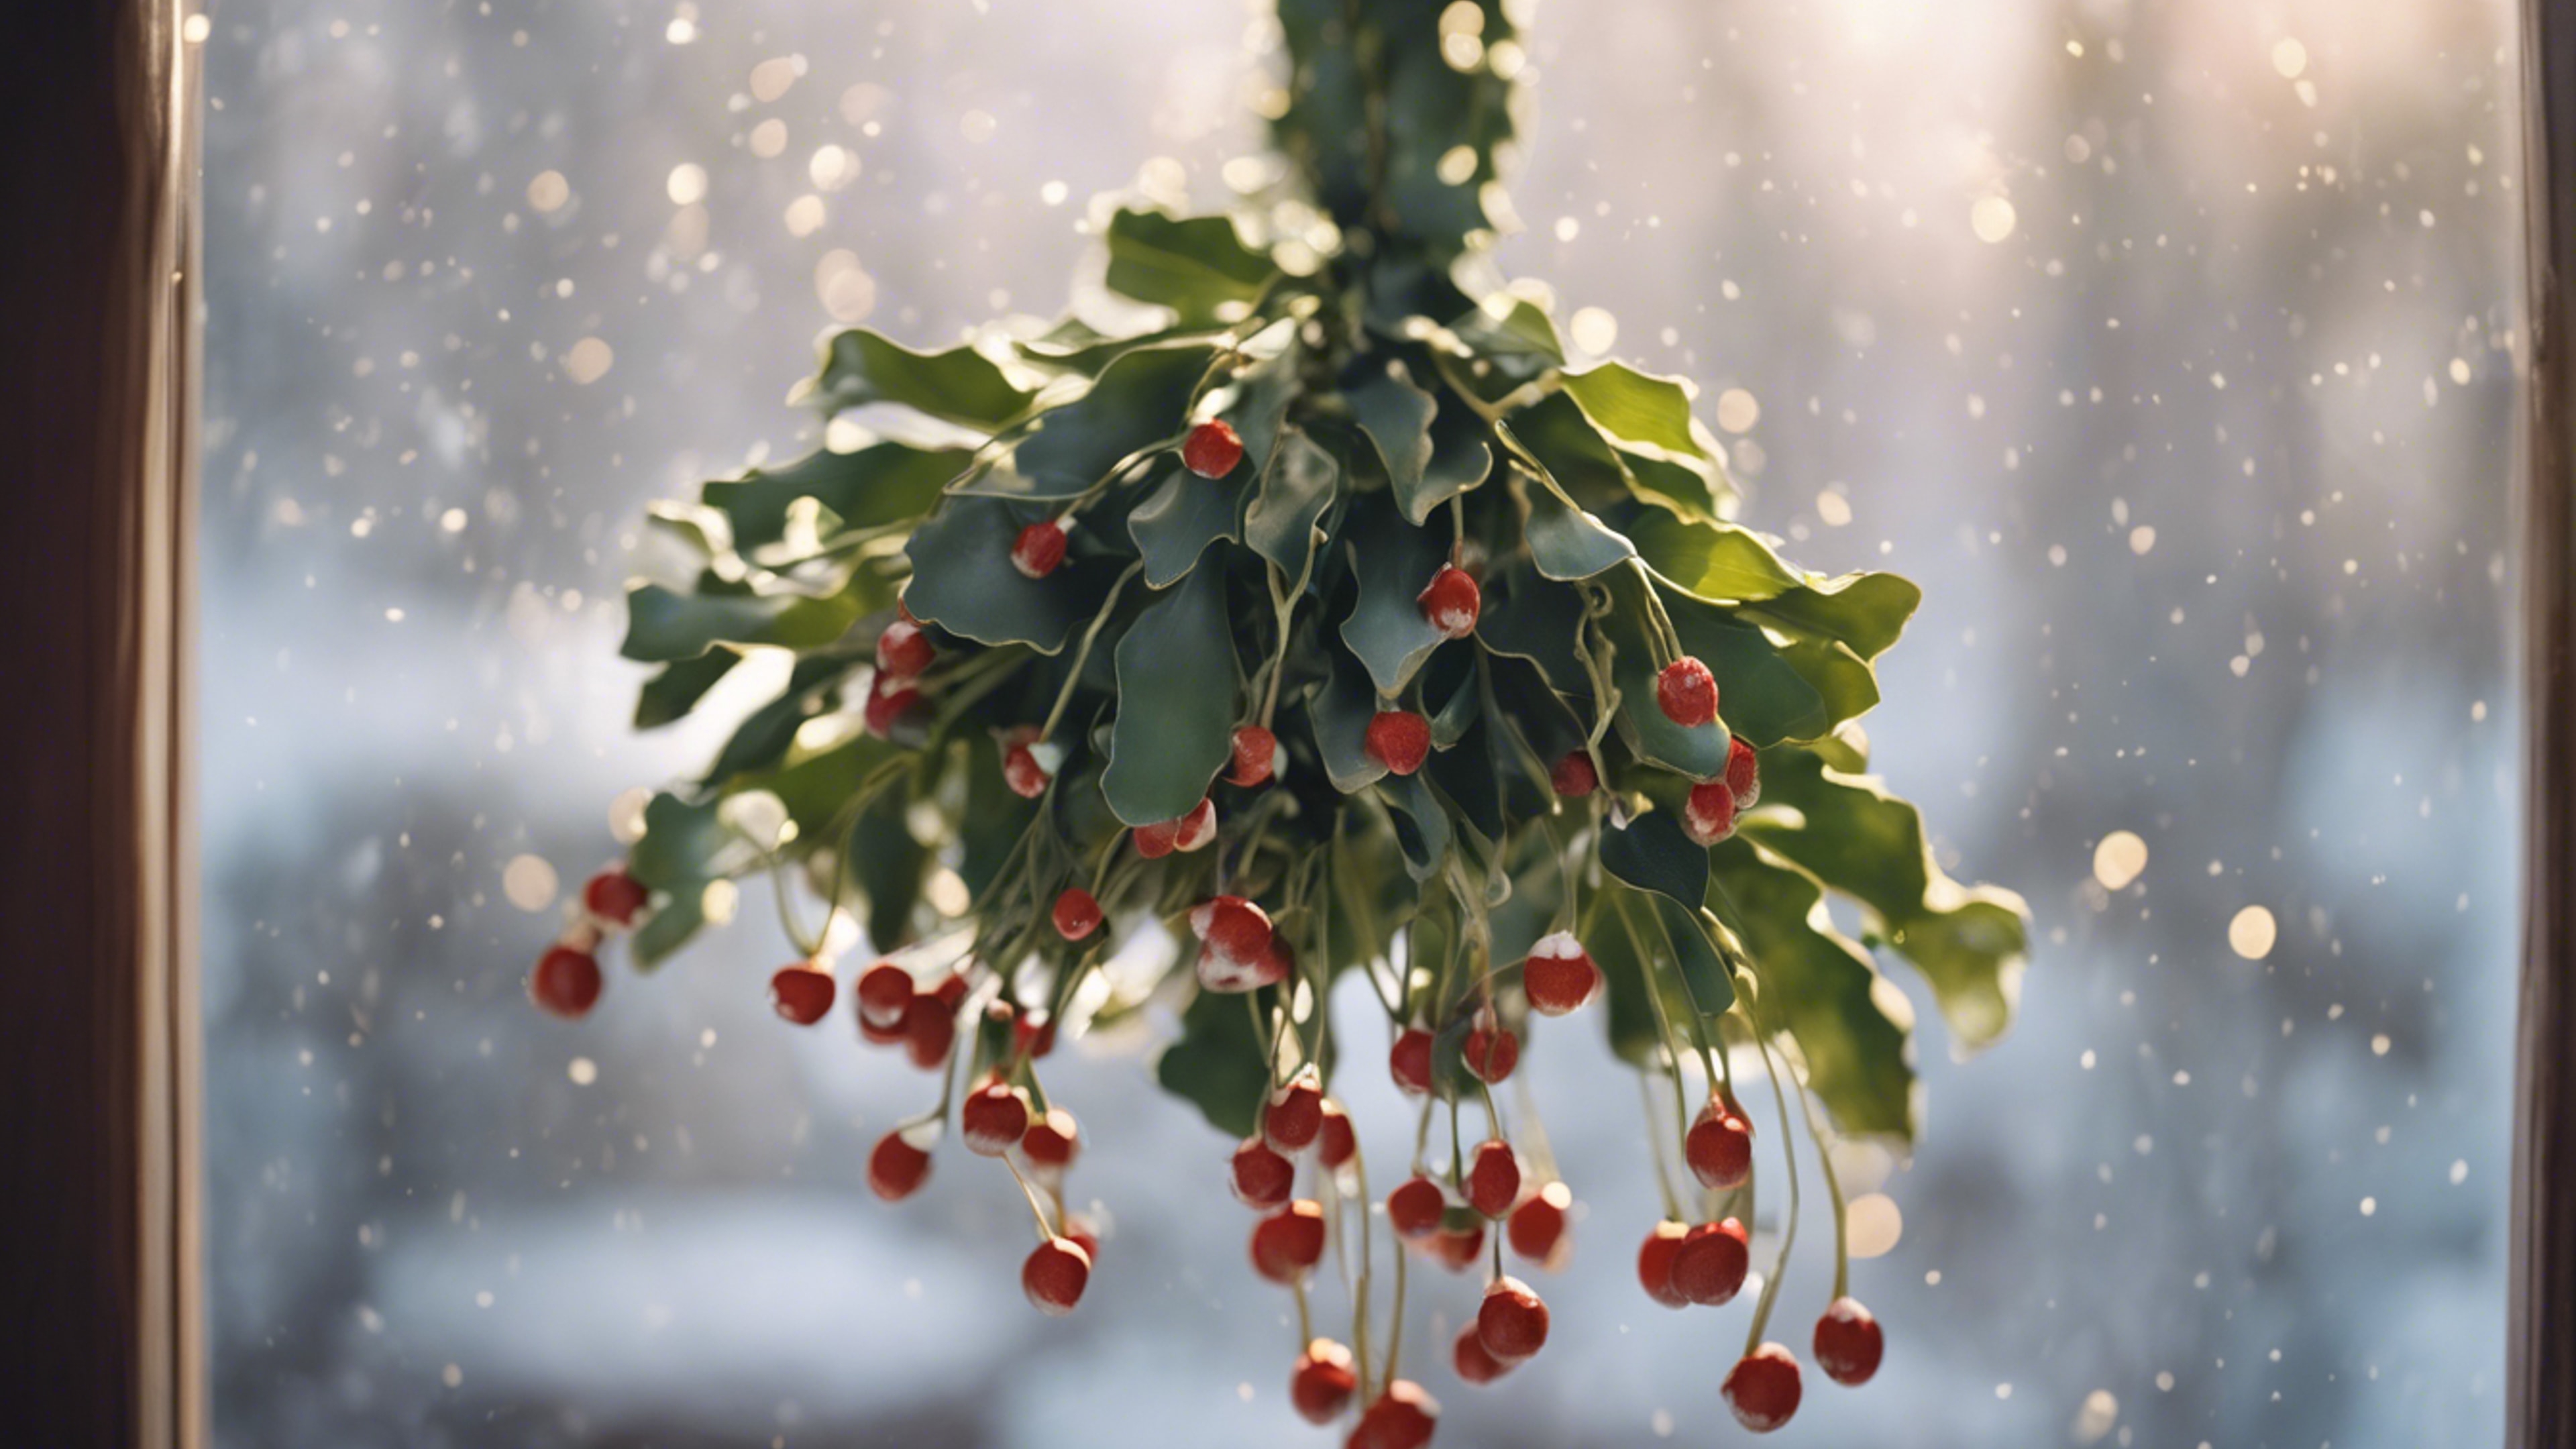 A bunch of mistletoe hanging from a door frame, welcoming family and love during winter.壁紙[d07c93d49c6843628fd5]